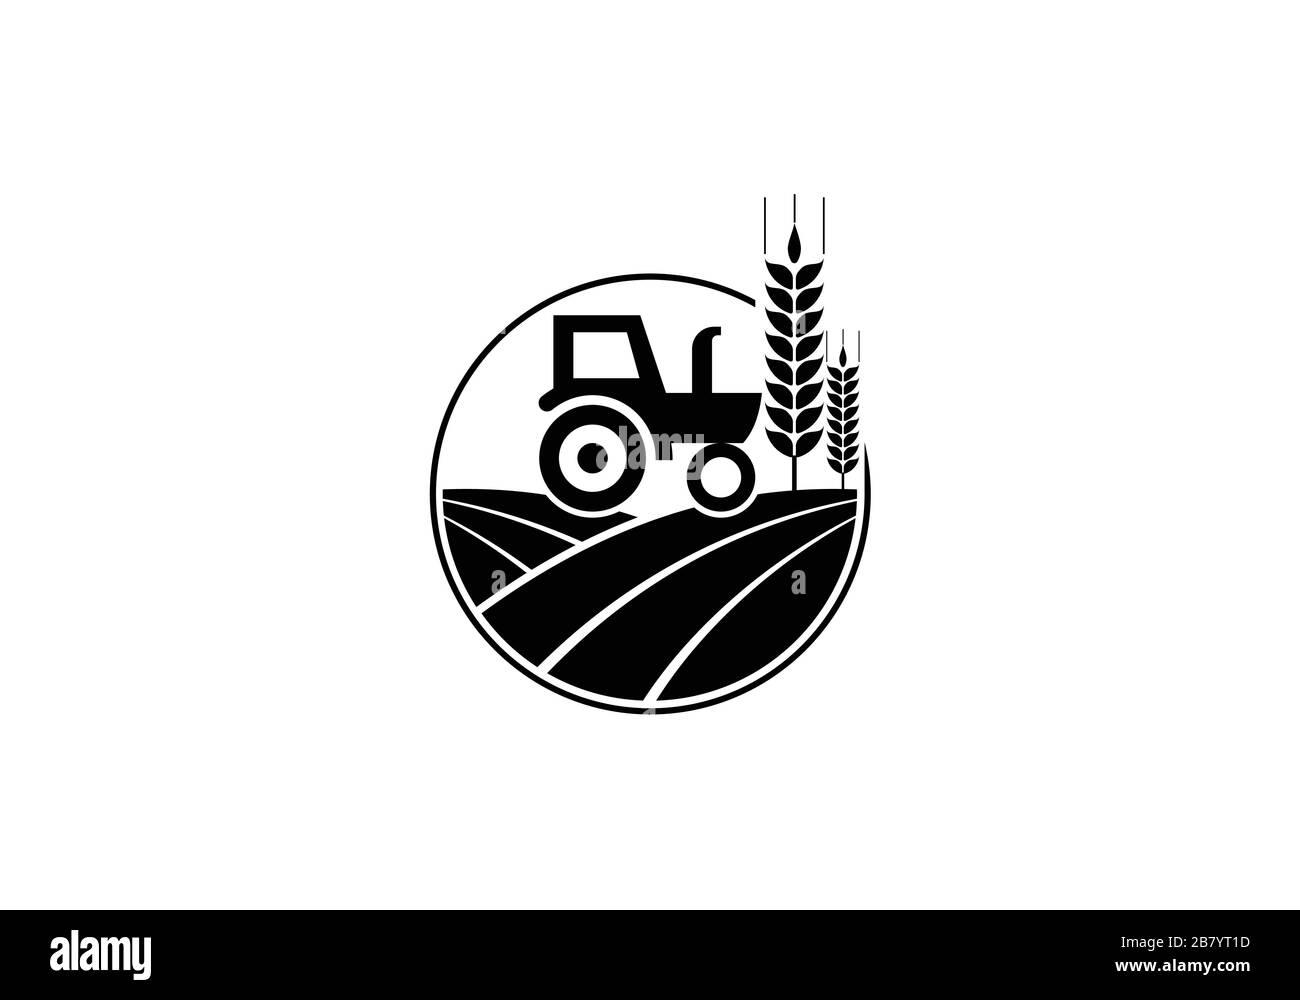 Tractor logo or farm logo template, Suitable for any business related to agriculture industries. Stock Vector